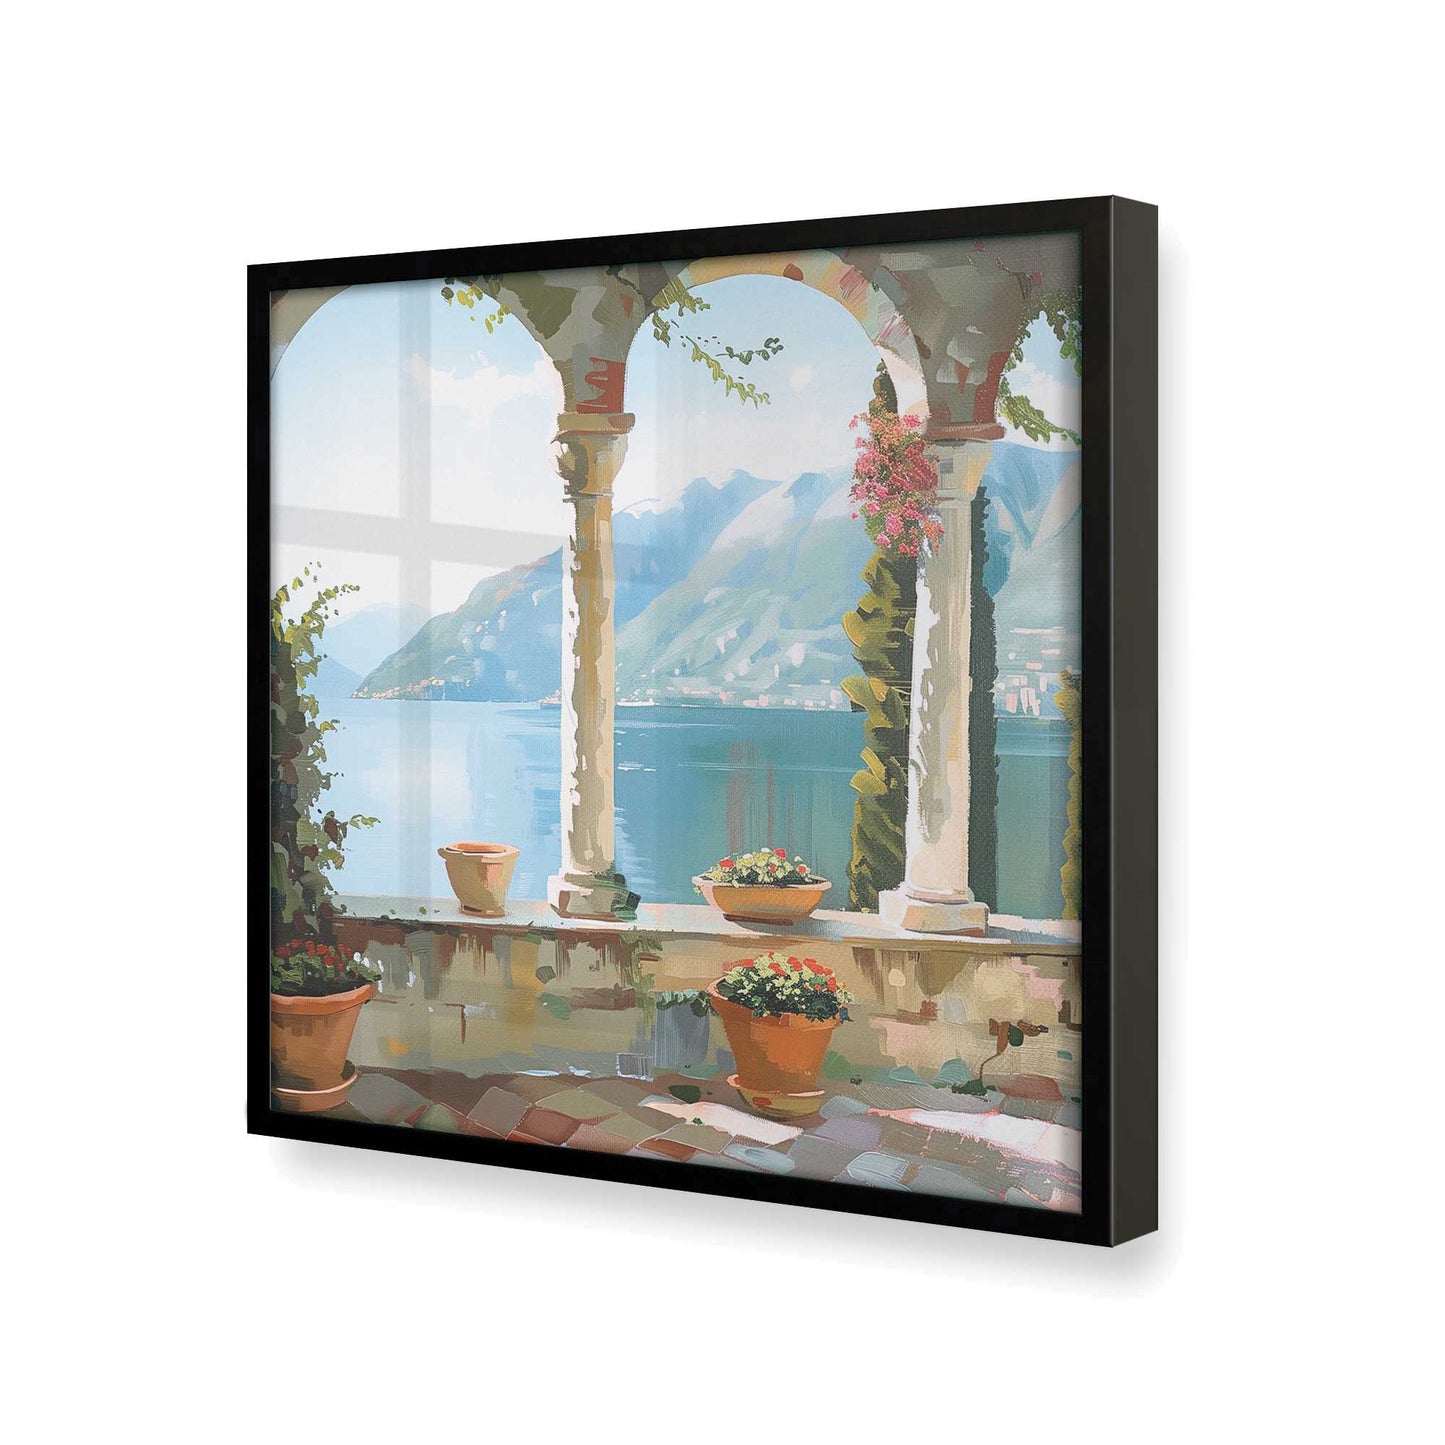 [Color:Satin Black],[shape:square] Picture of art in a Satin Black frame at an angle